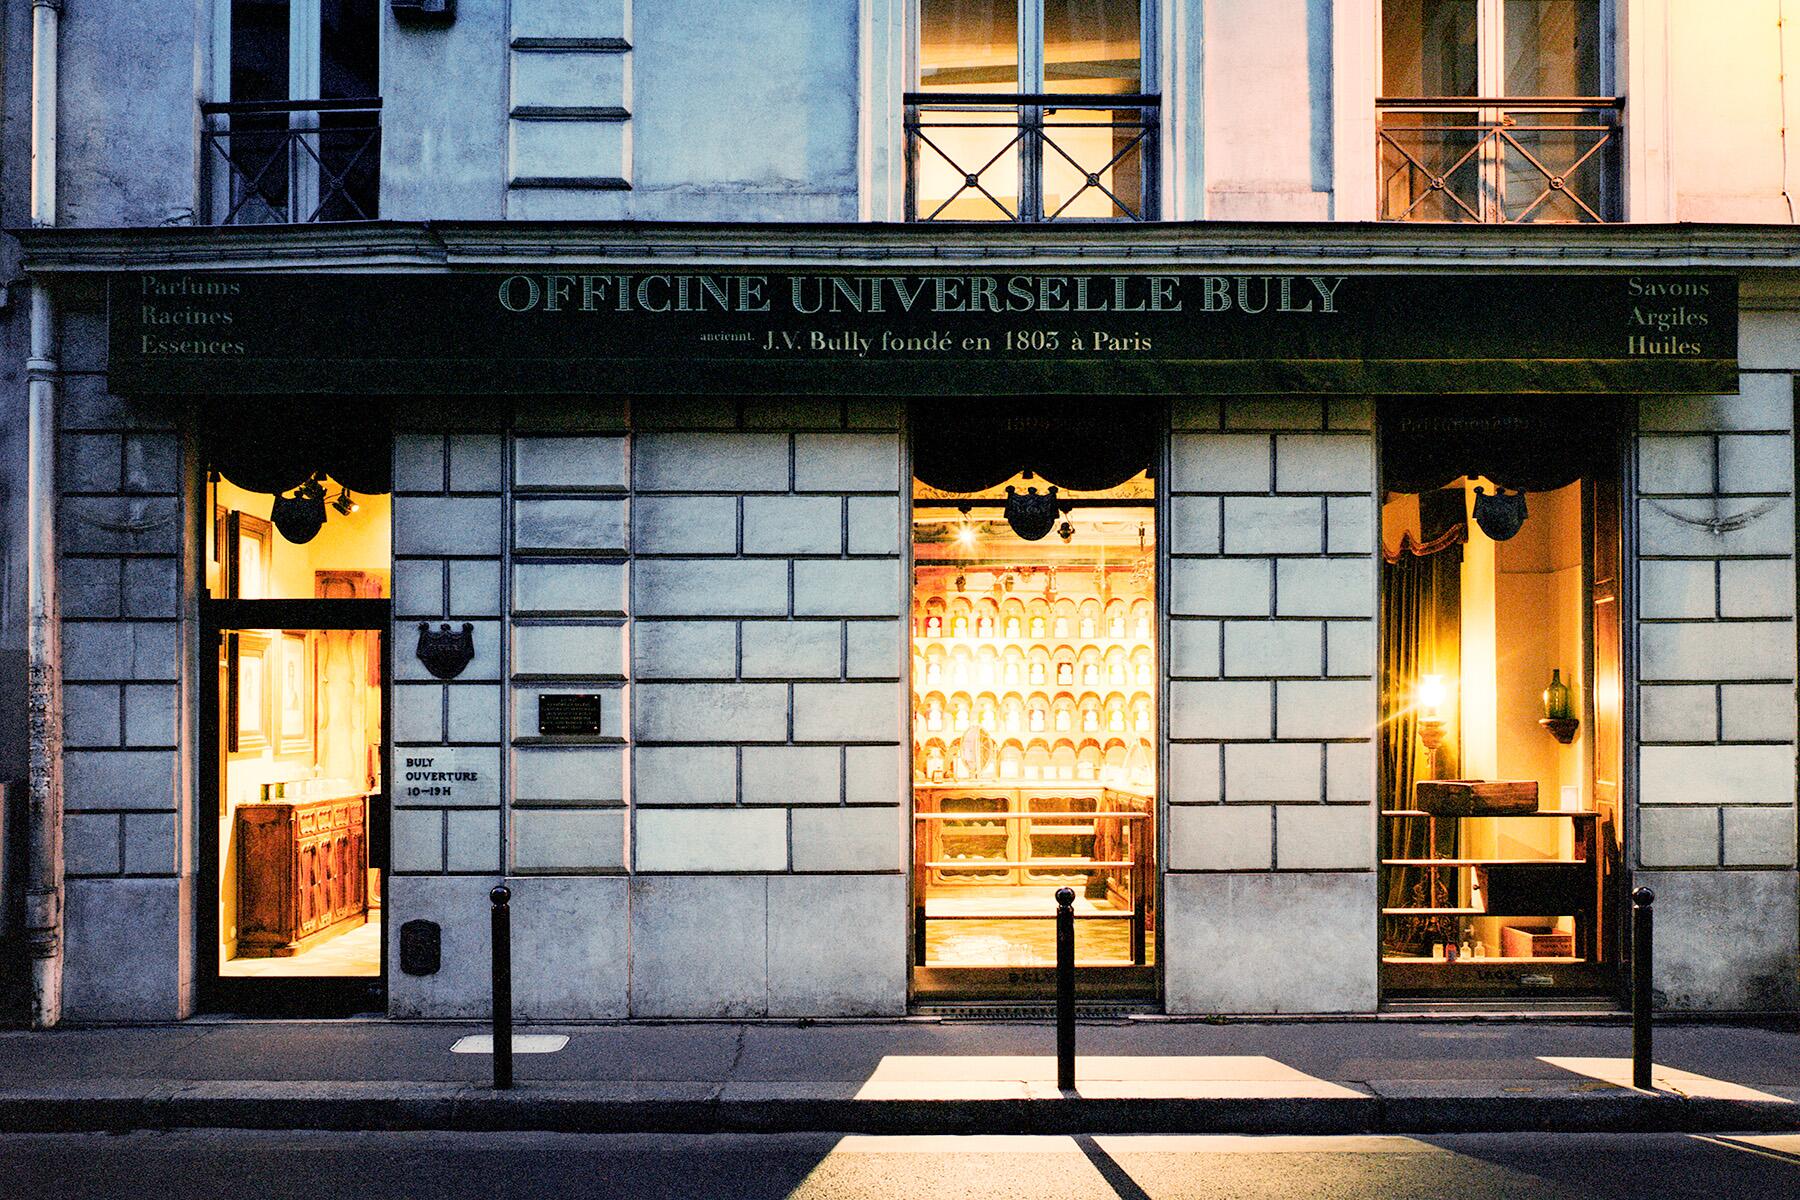 <a href='https://www.fodors.com/world/europe/france/paris/experiences/news/photos/the-best-places-to-shop-in-paris#'>From &quot;The 20 Best Places to Shop in Paris: Officine Universelle Buly and Amalthea&quot;</a>